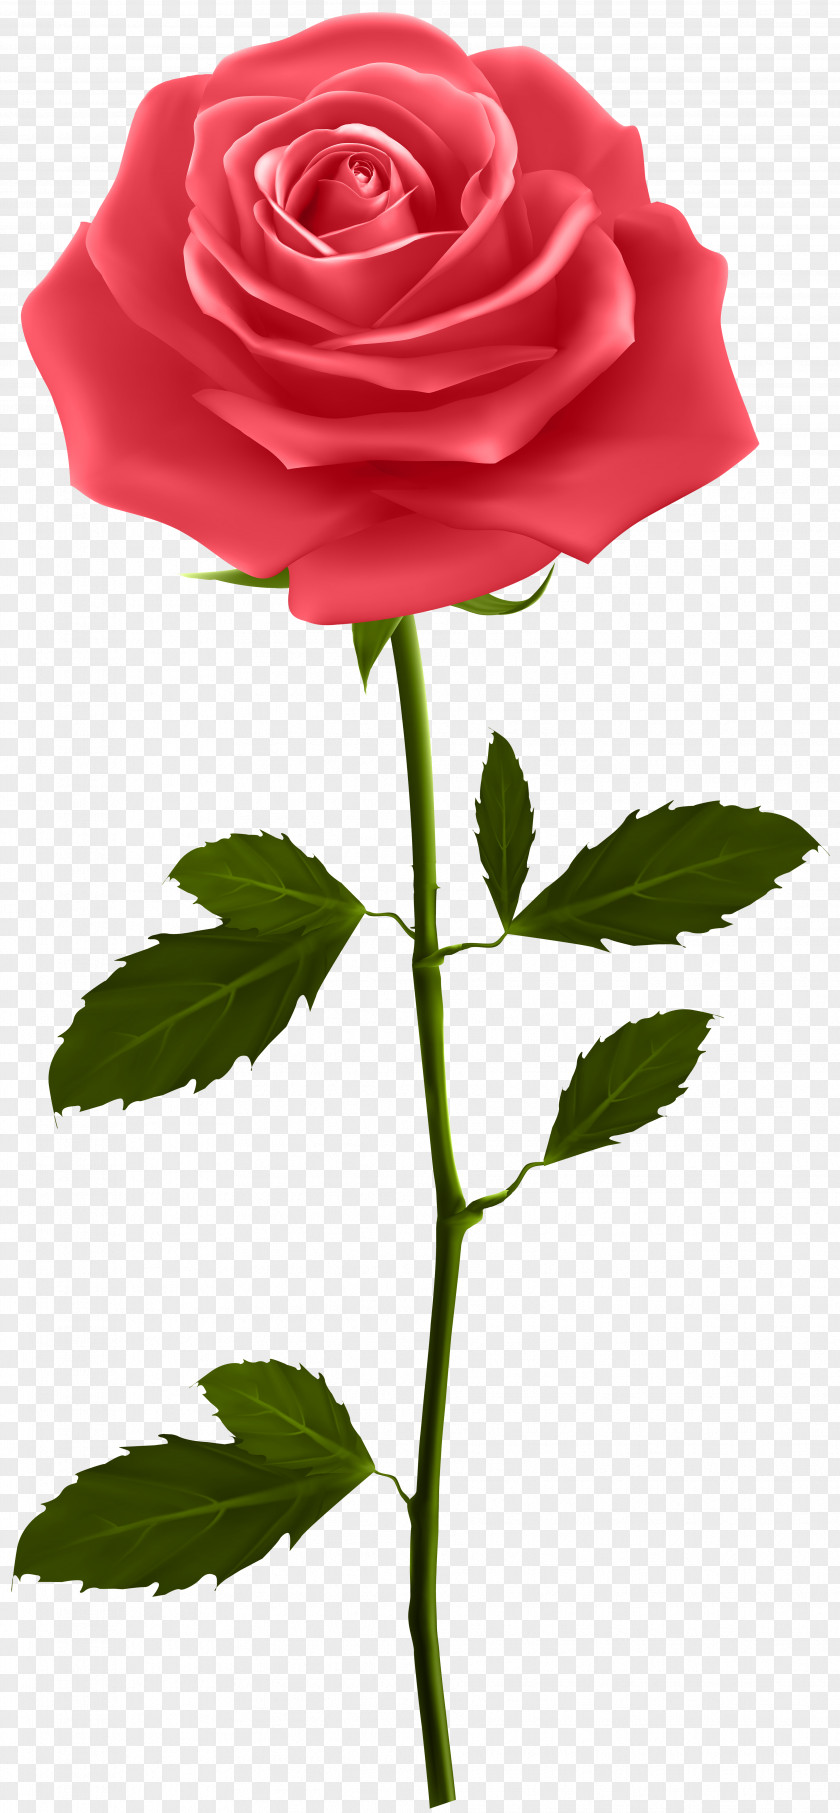 Red Rose With Stem Clip Art PNG